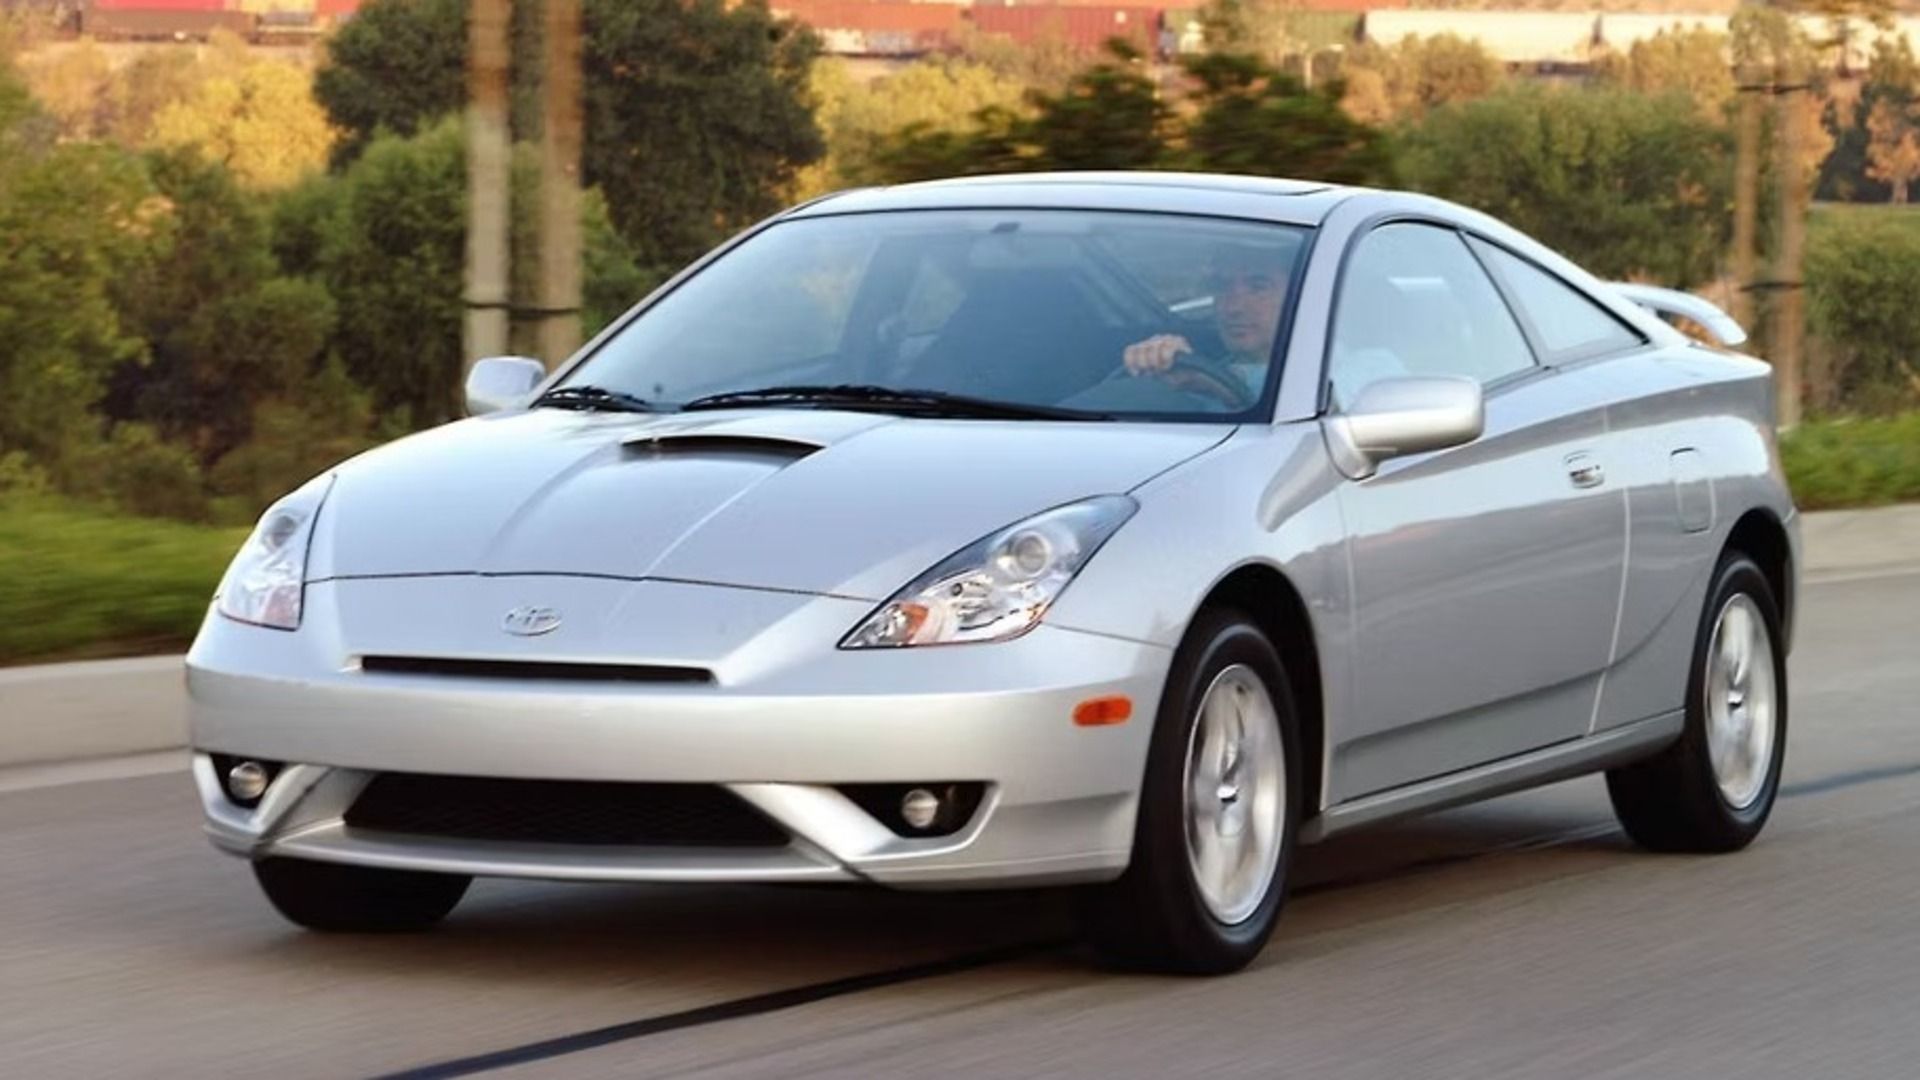 A Silver Toyota Celica T230 on the road driving past trees and bushes.